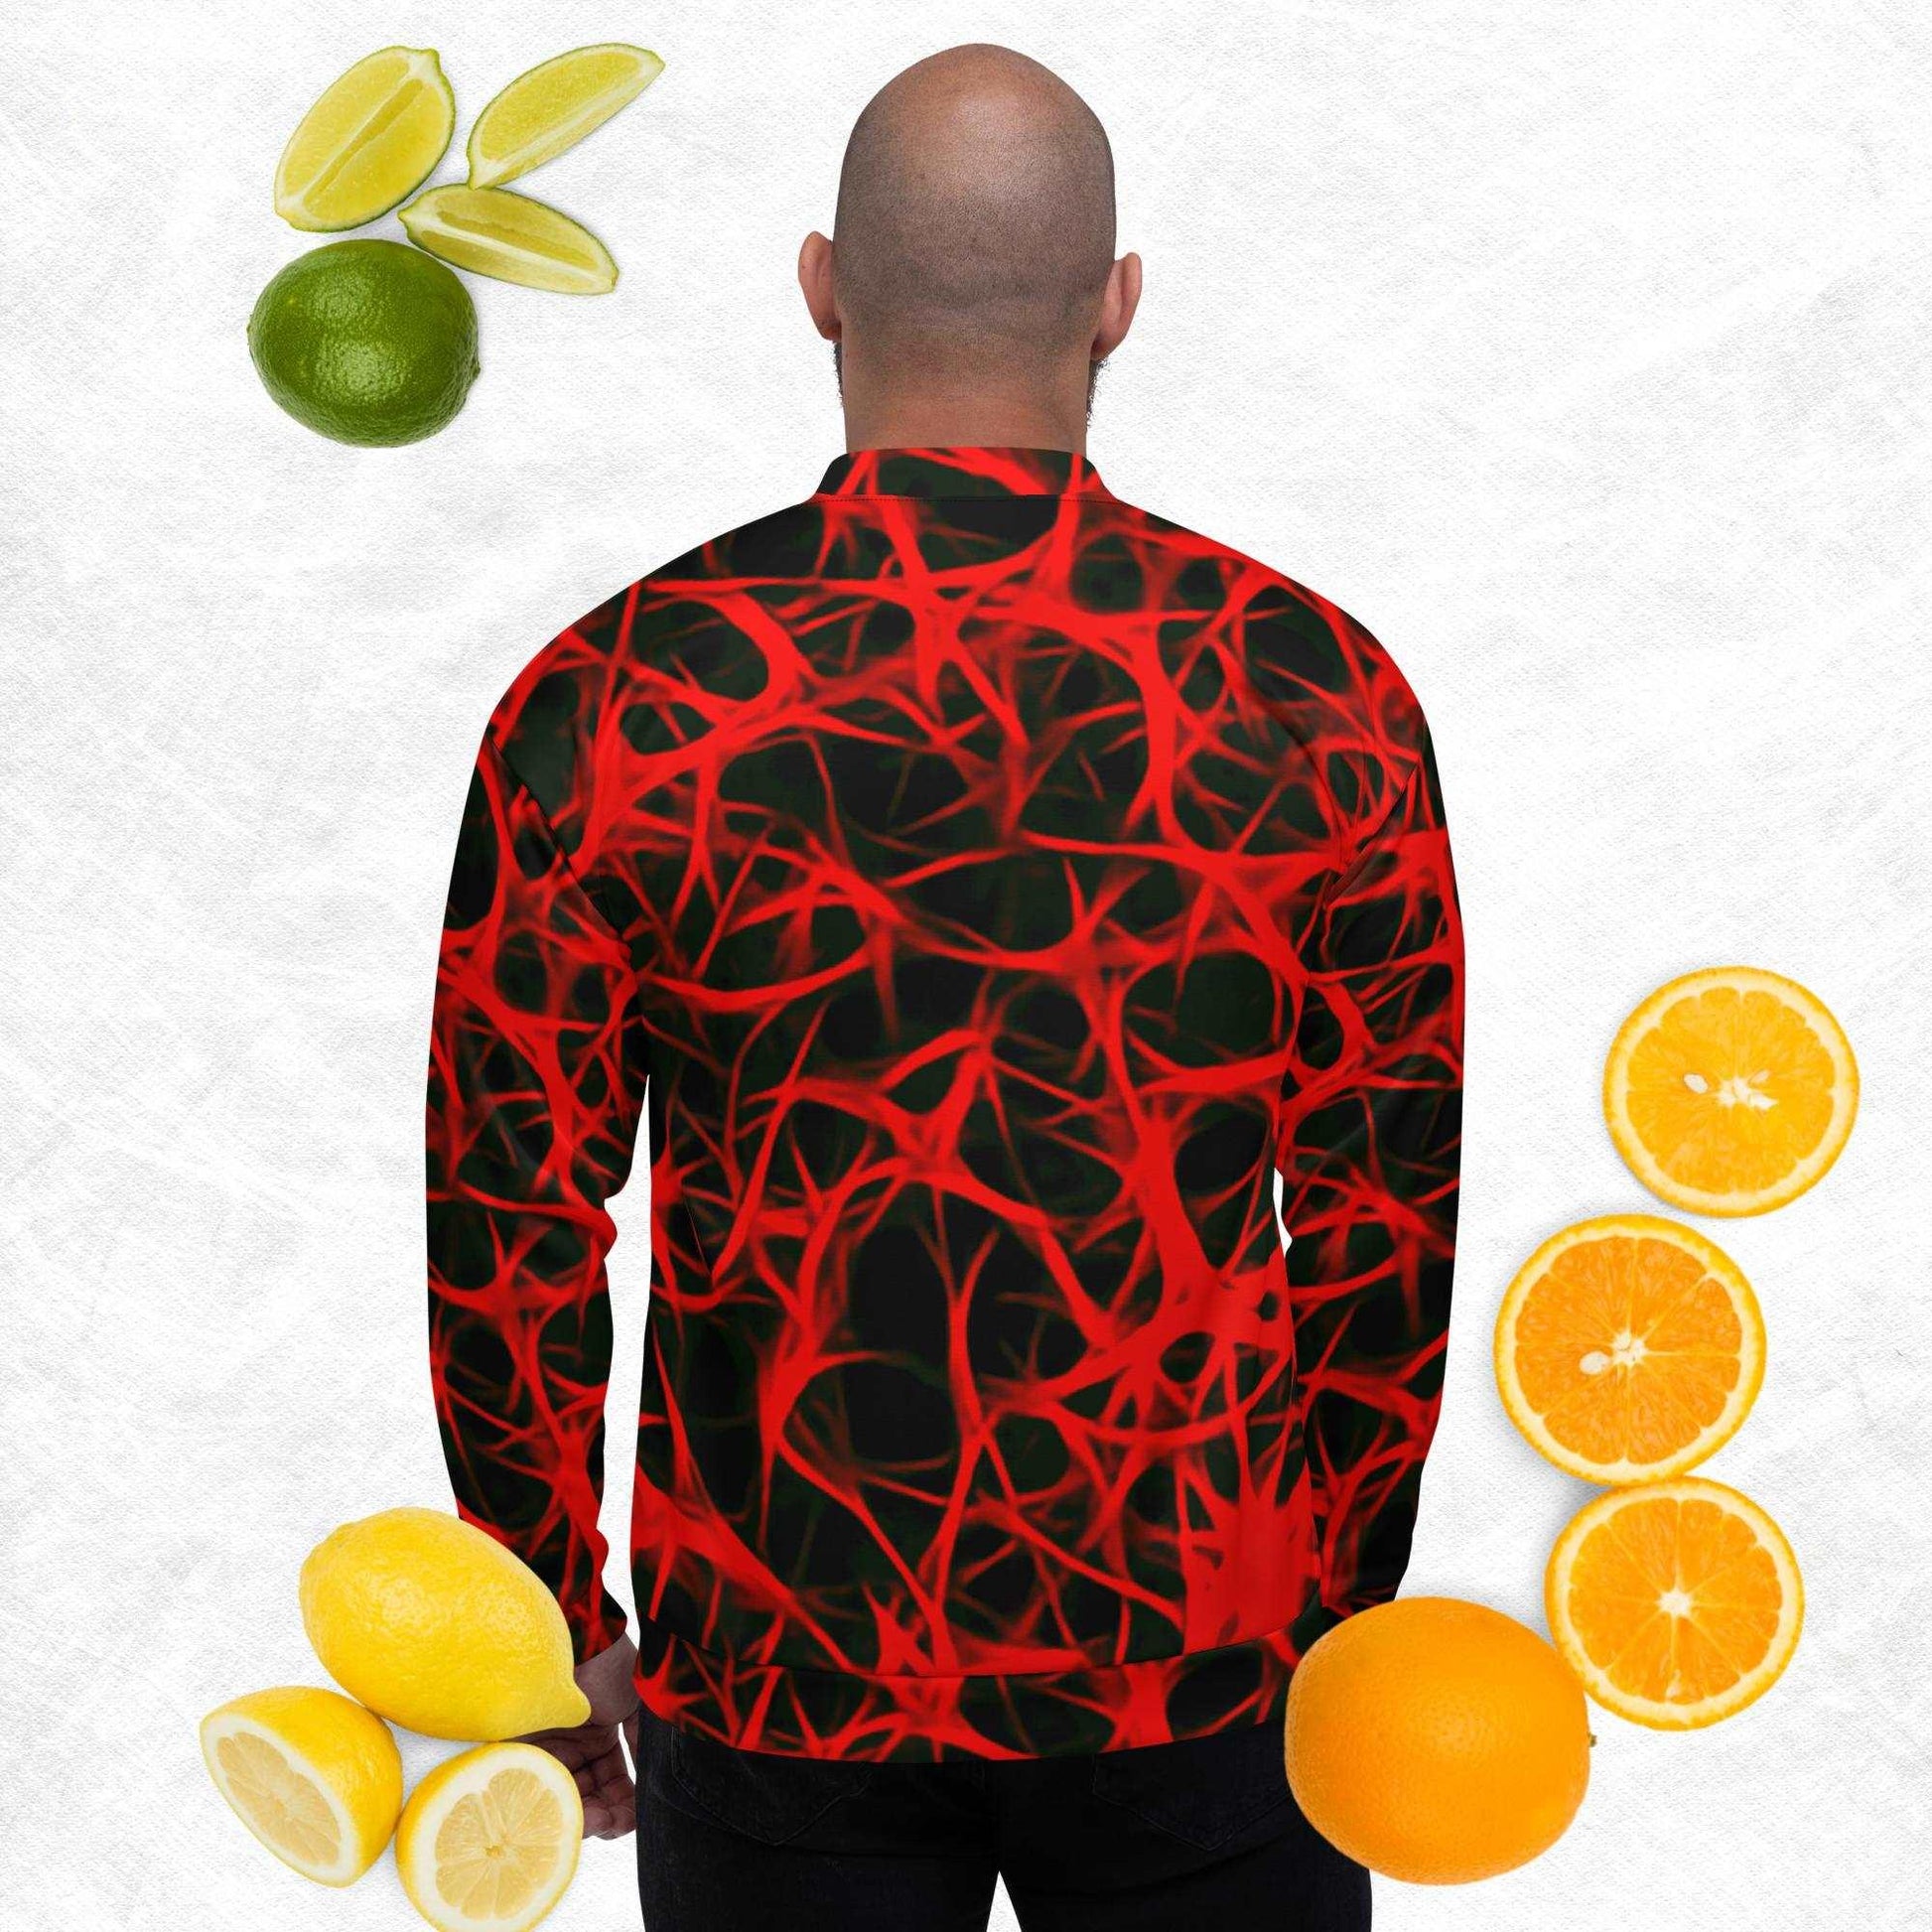 Introducing the Bold Red-Charged Unisex Bomber Jacket - Ignite Your Style with This Must-Have Fashion Statement! - Lizard Vigilante